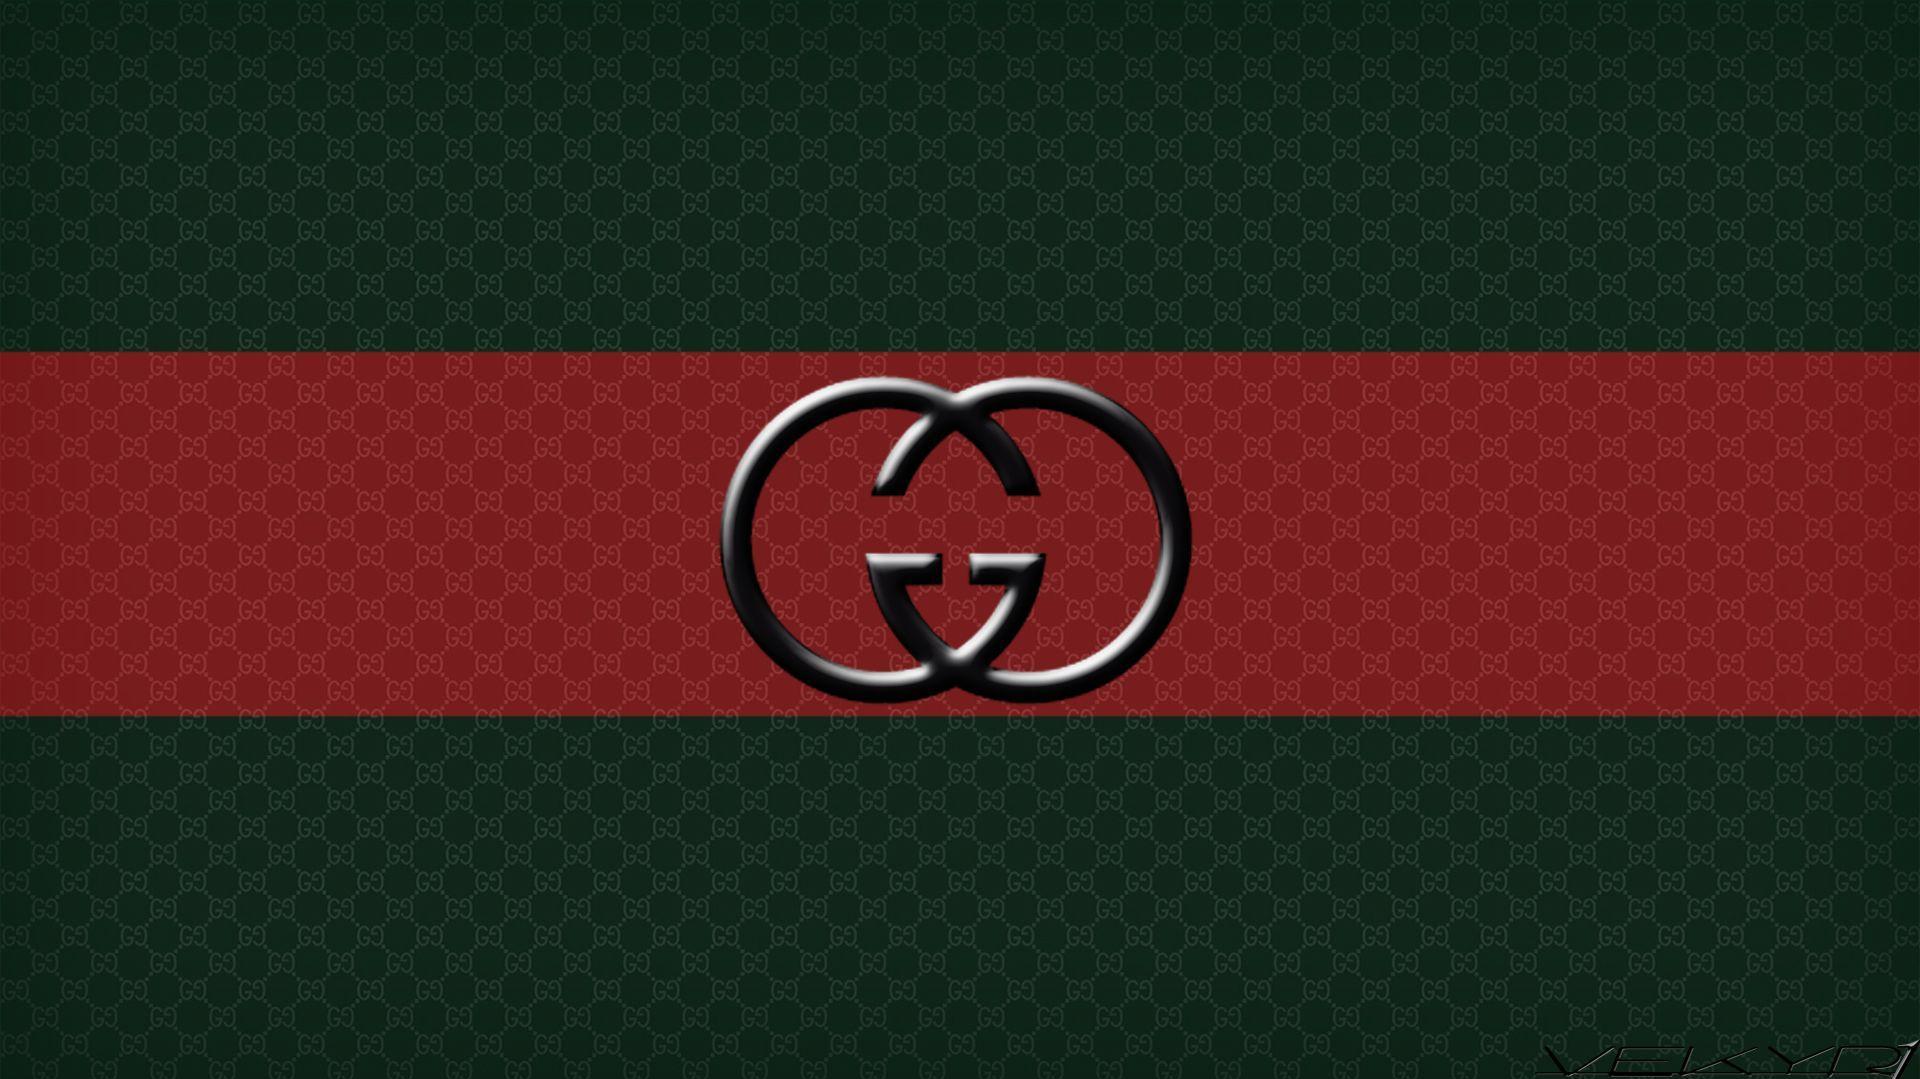 Download Gucci Coral Snake With The Supreme Logo Wallpaper | Wallpapers.com